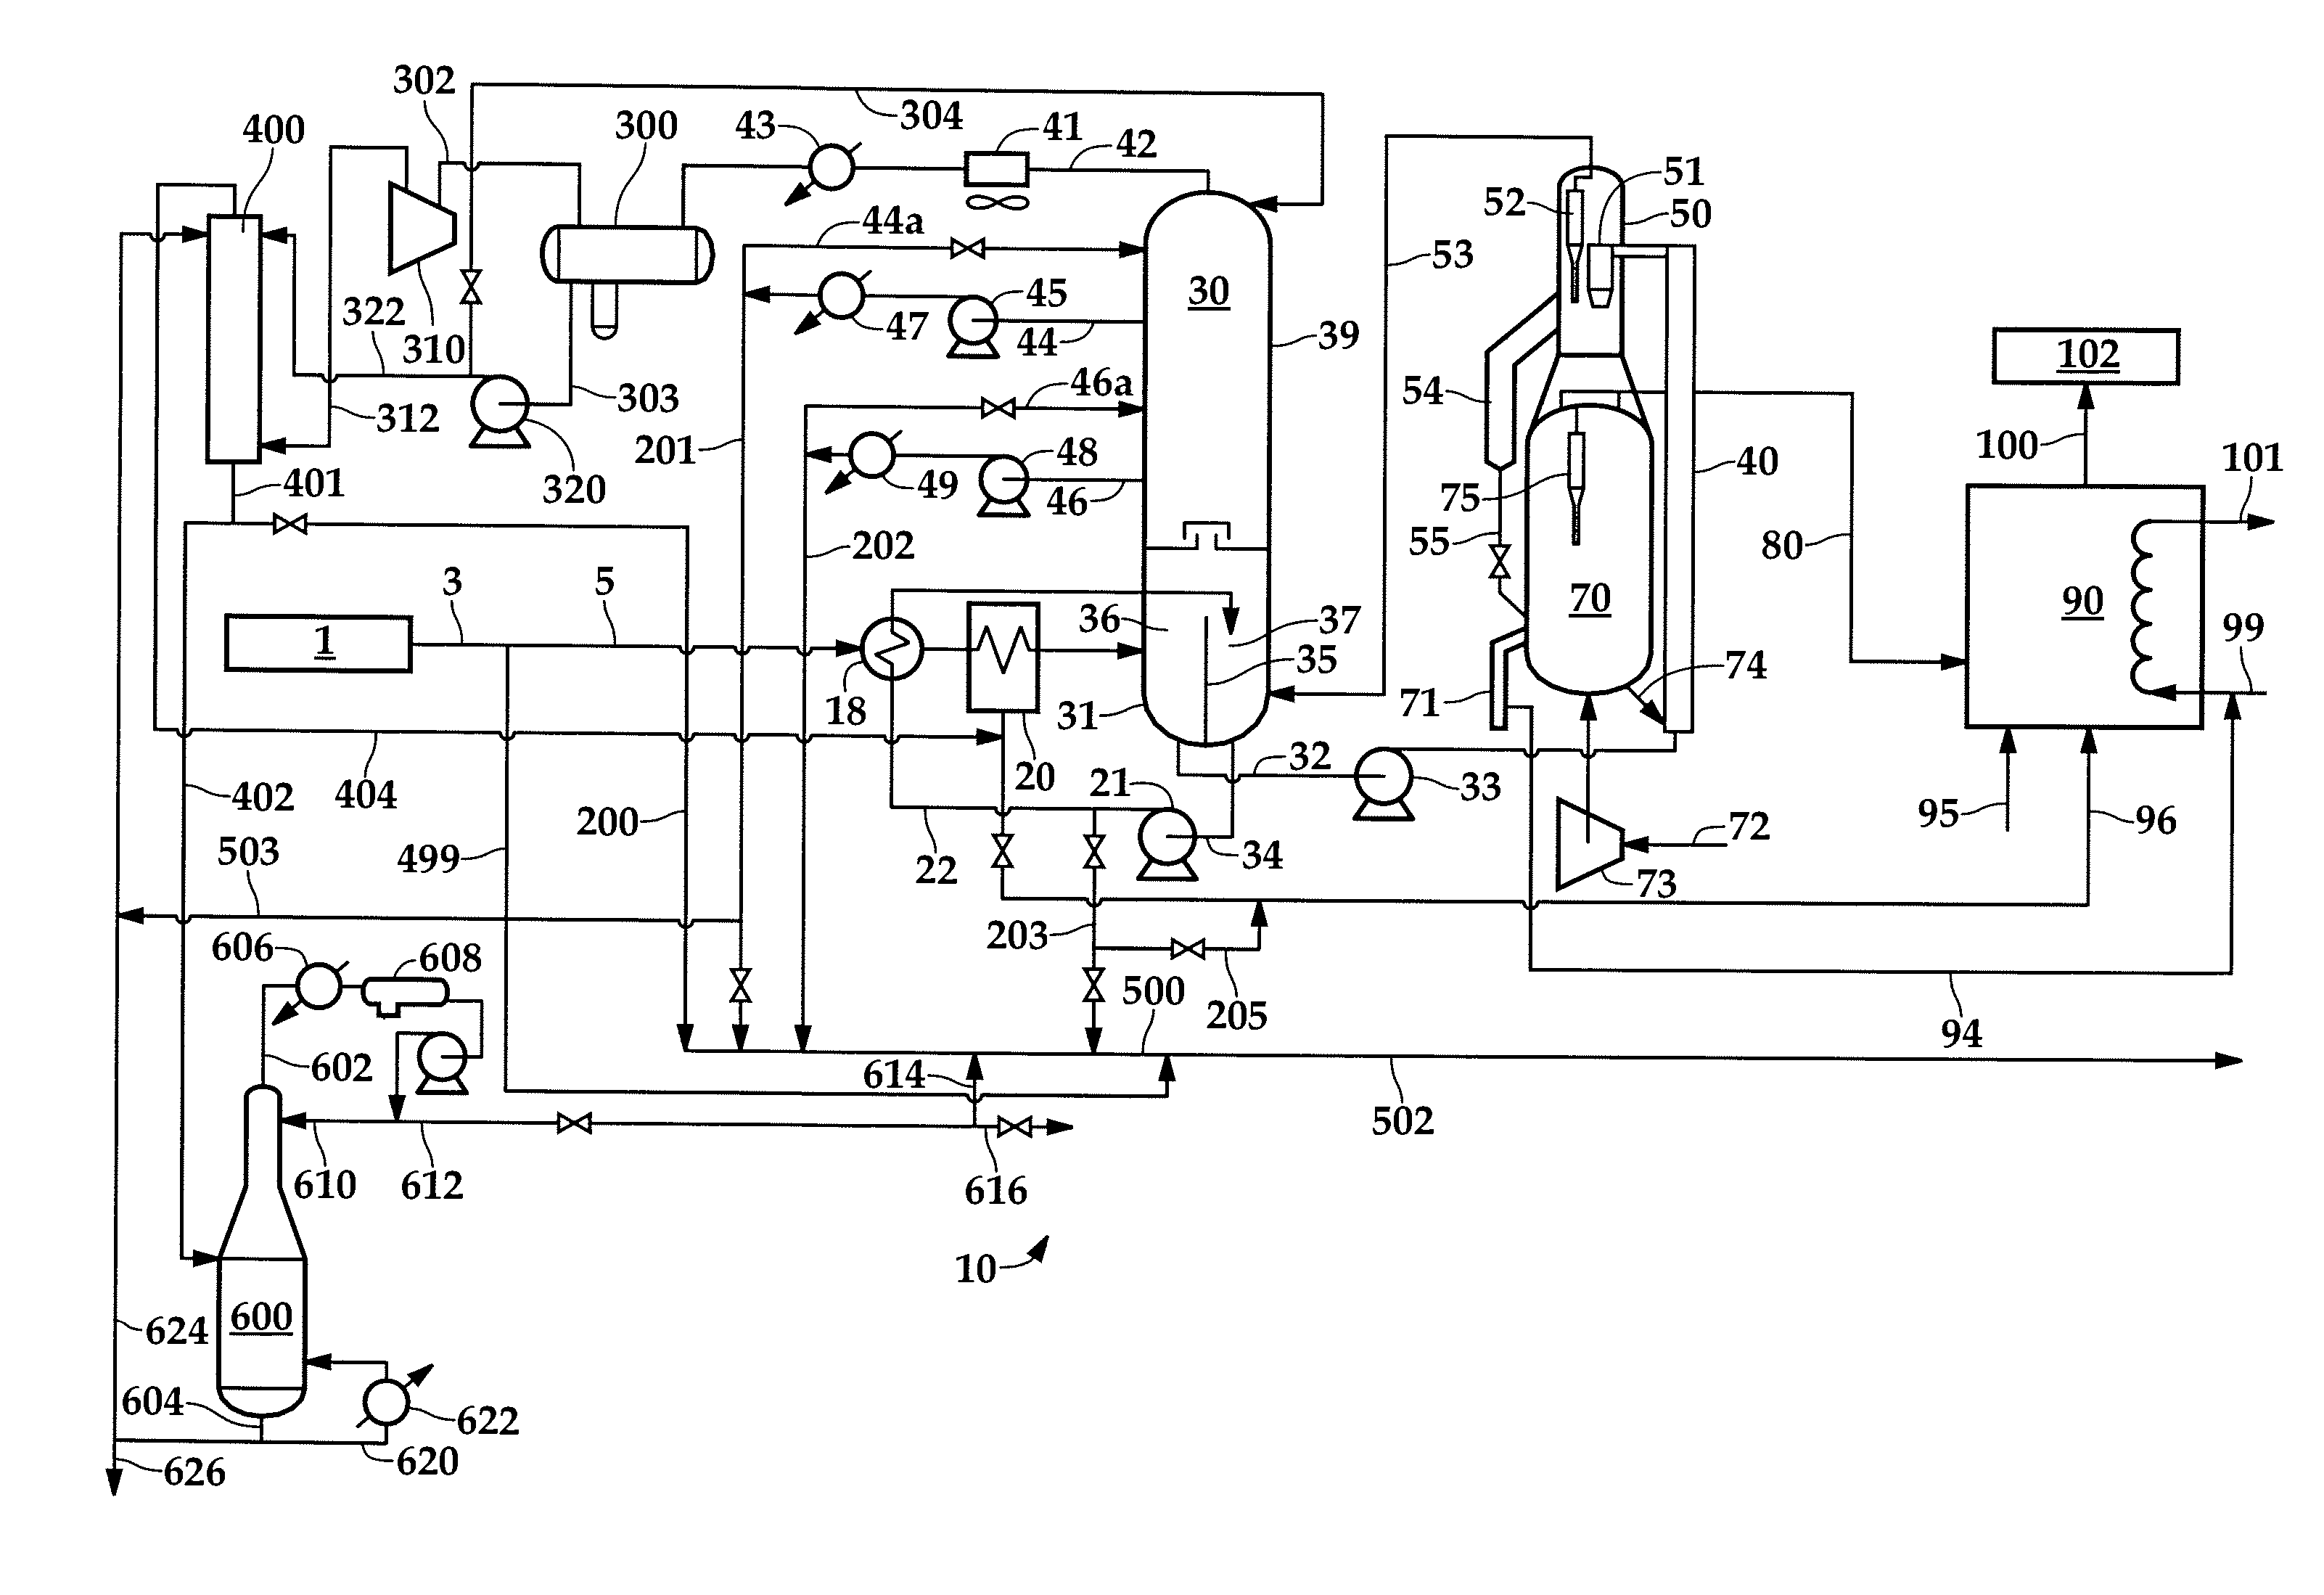 Process and apparatus for improving flow properties of crude petroleum